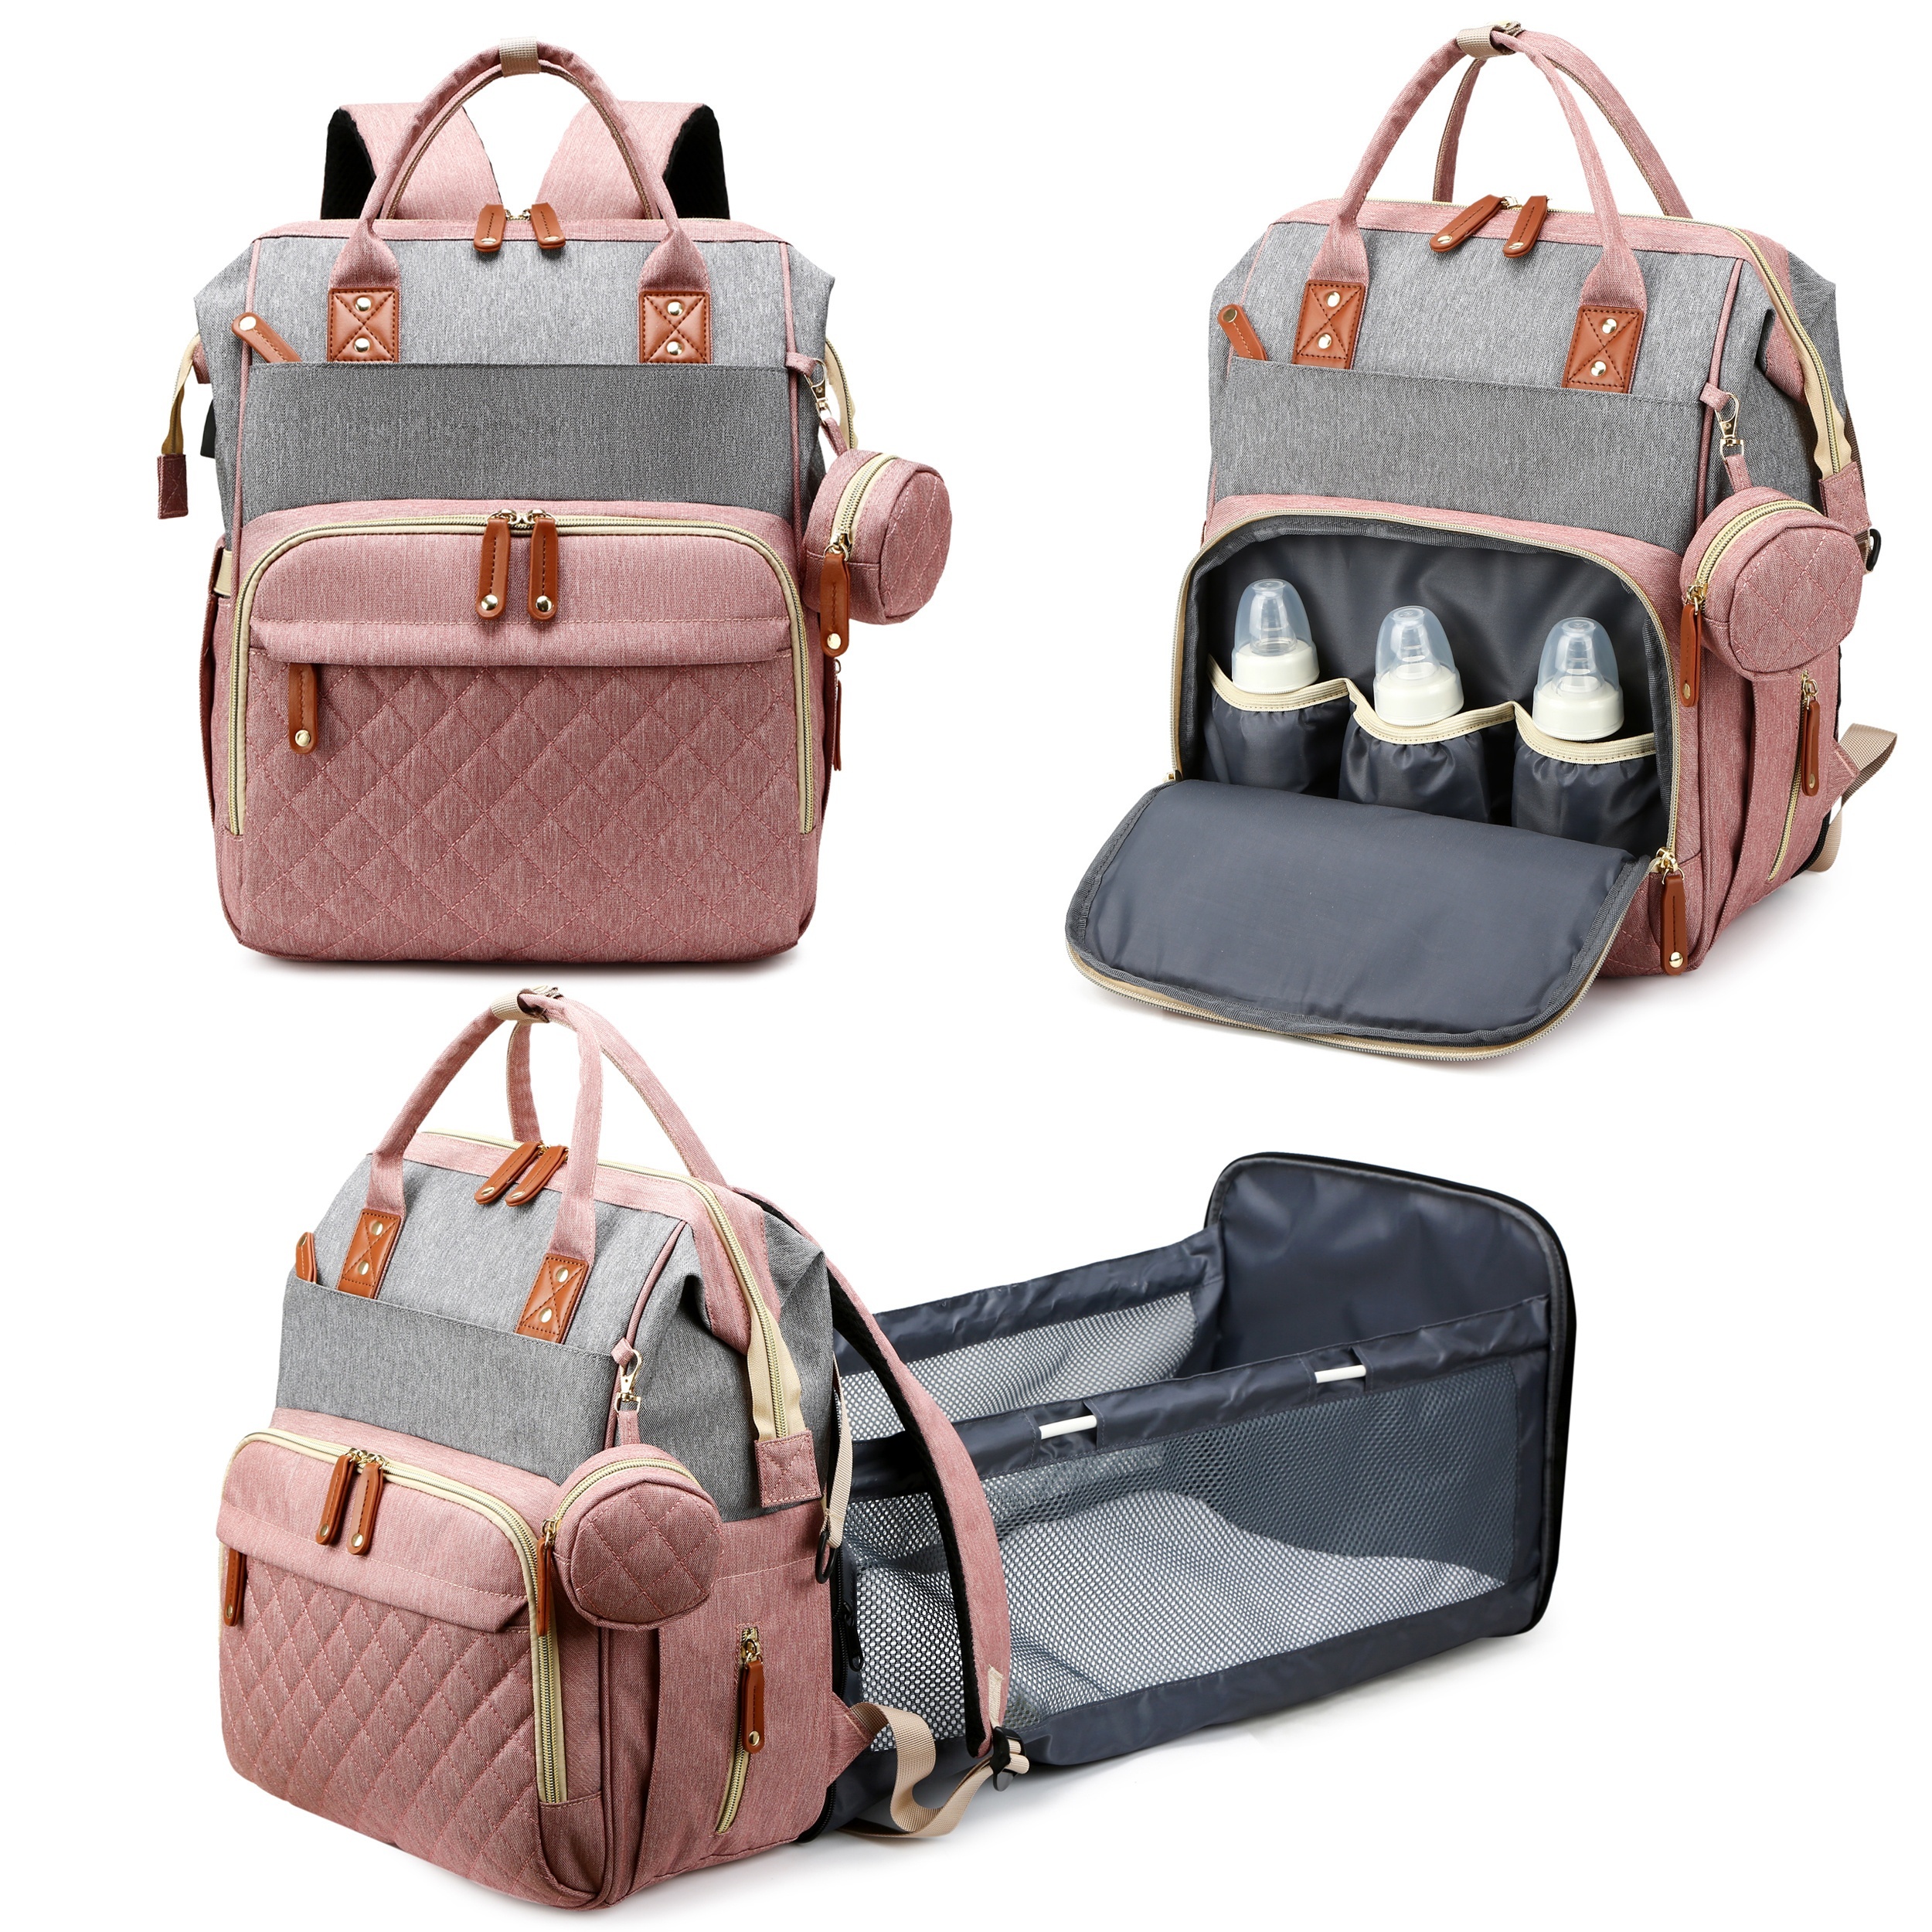 Baby diaper bag for mother | baby accessories bag - FAVISM